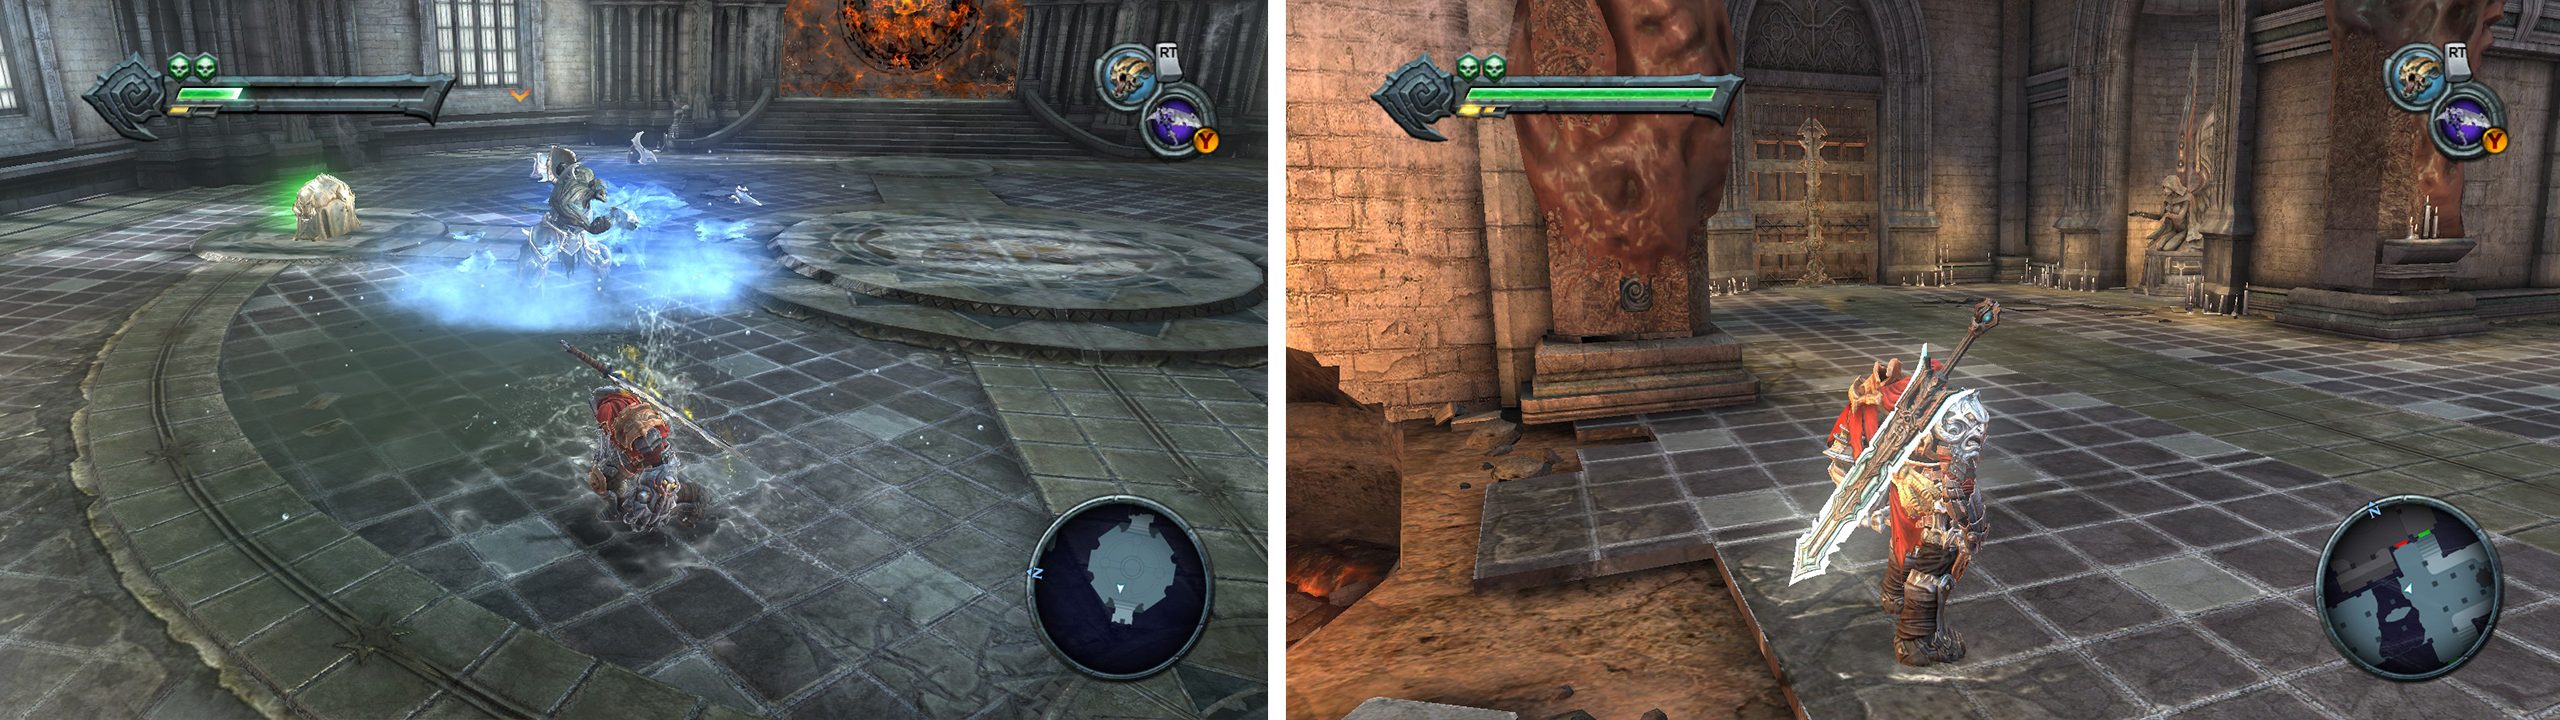 Kill the Iron Giant (left) before grabbing the Crystal Sword. Return to the main building and use the sword on the statue next to the far door (right).